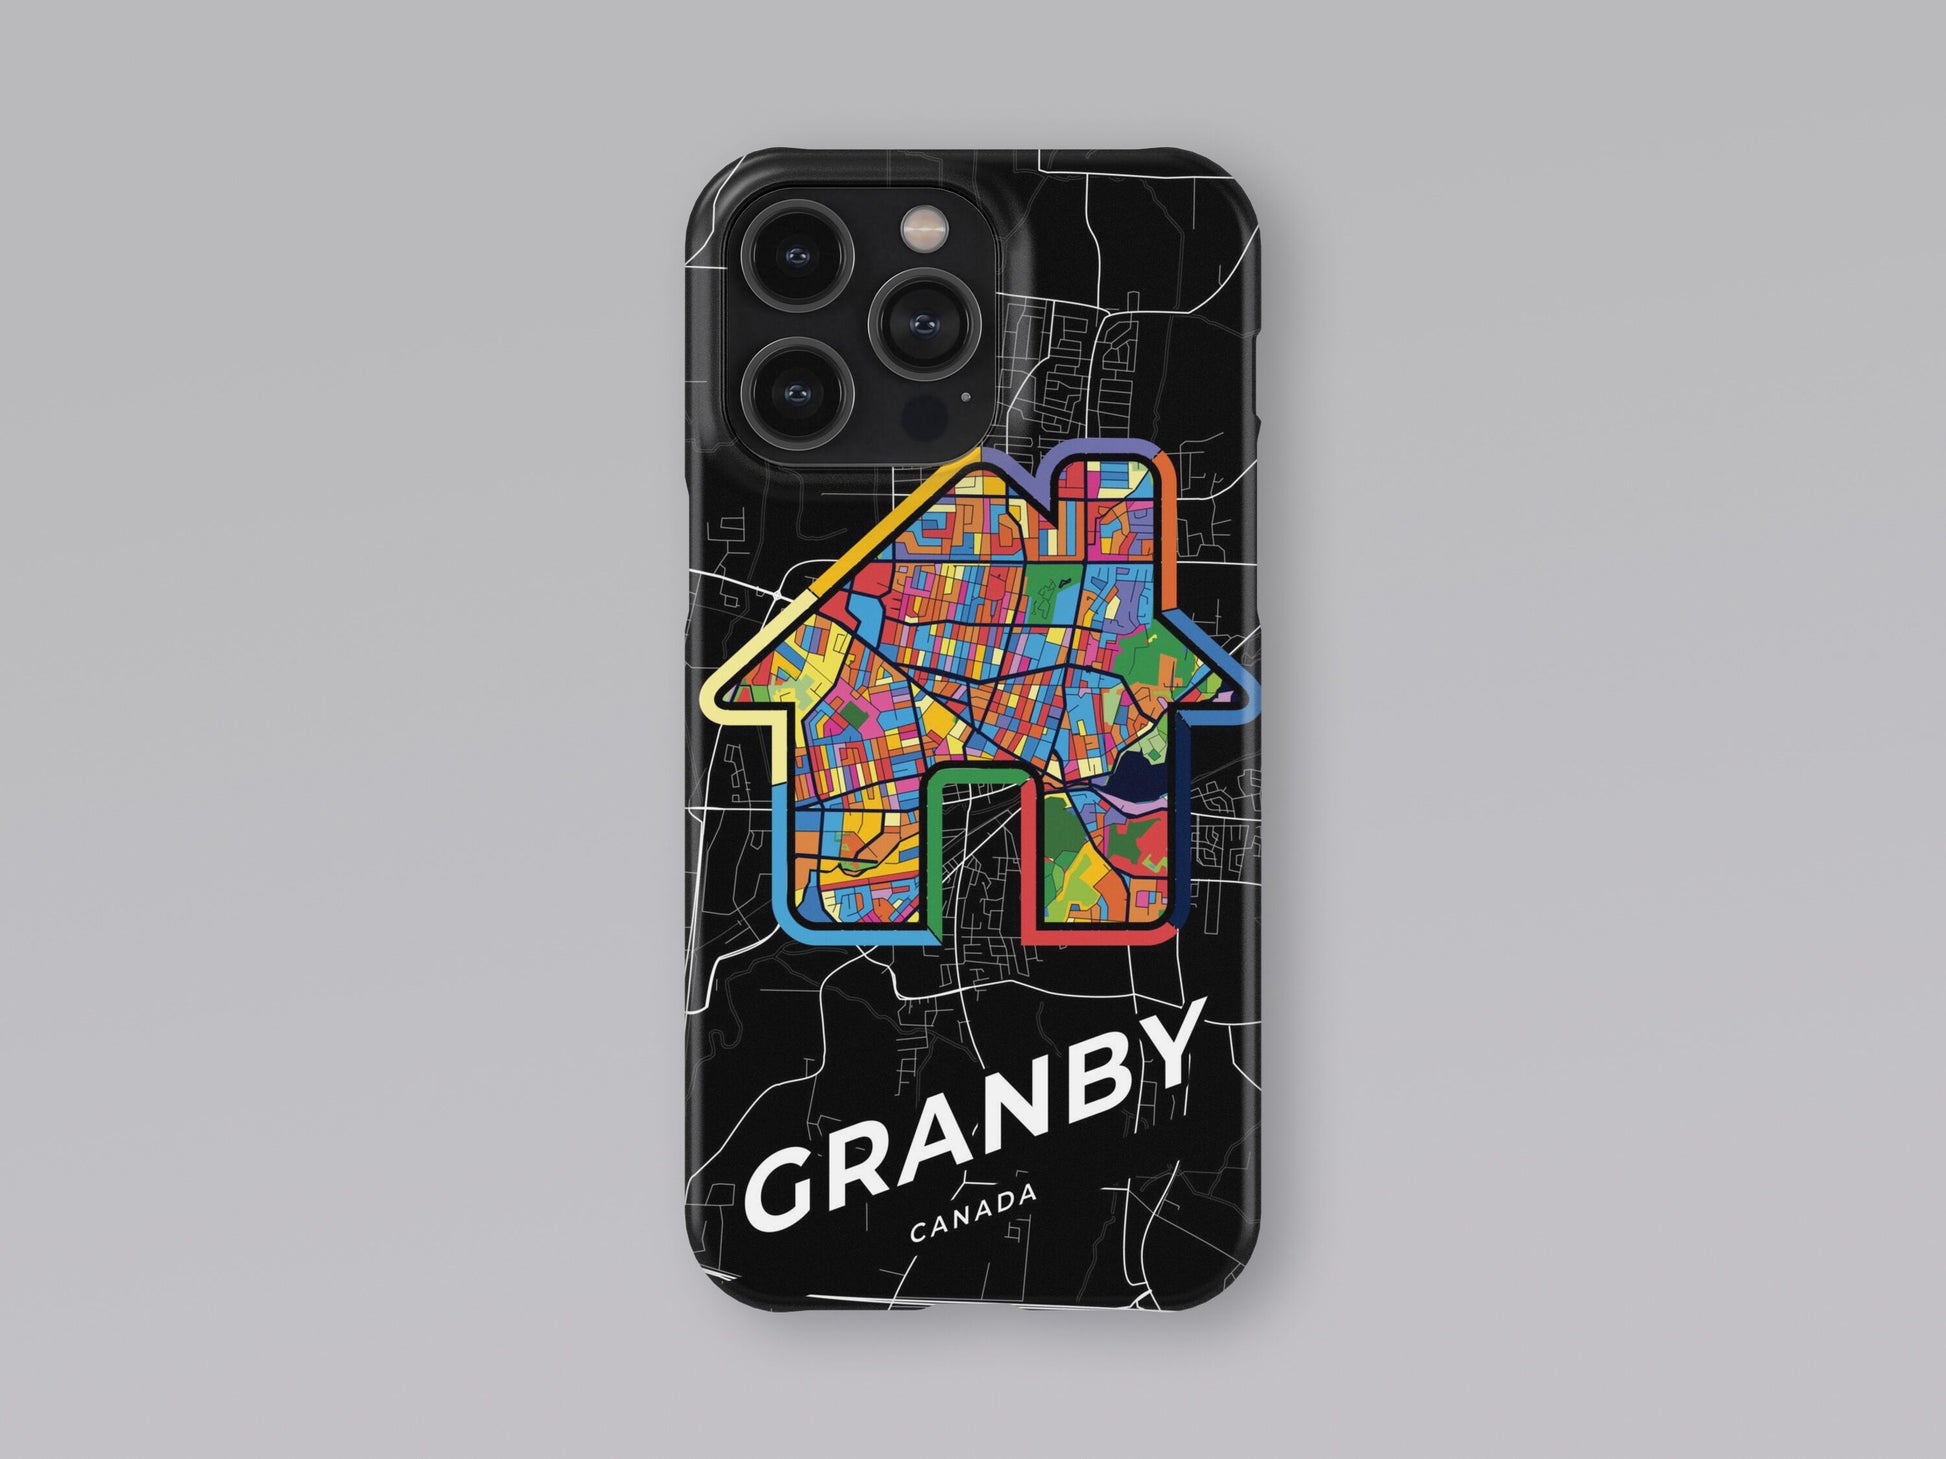 Granby Canada slim phone case with colorful icon. Birthday, wedding or housewarming gift. Couple match cases. 3